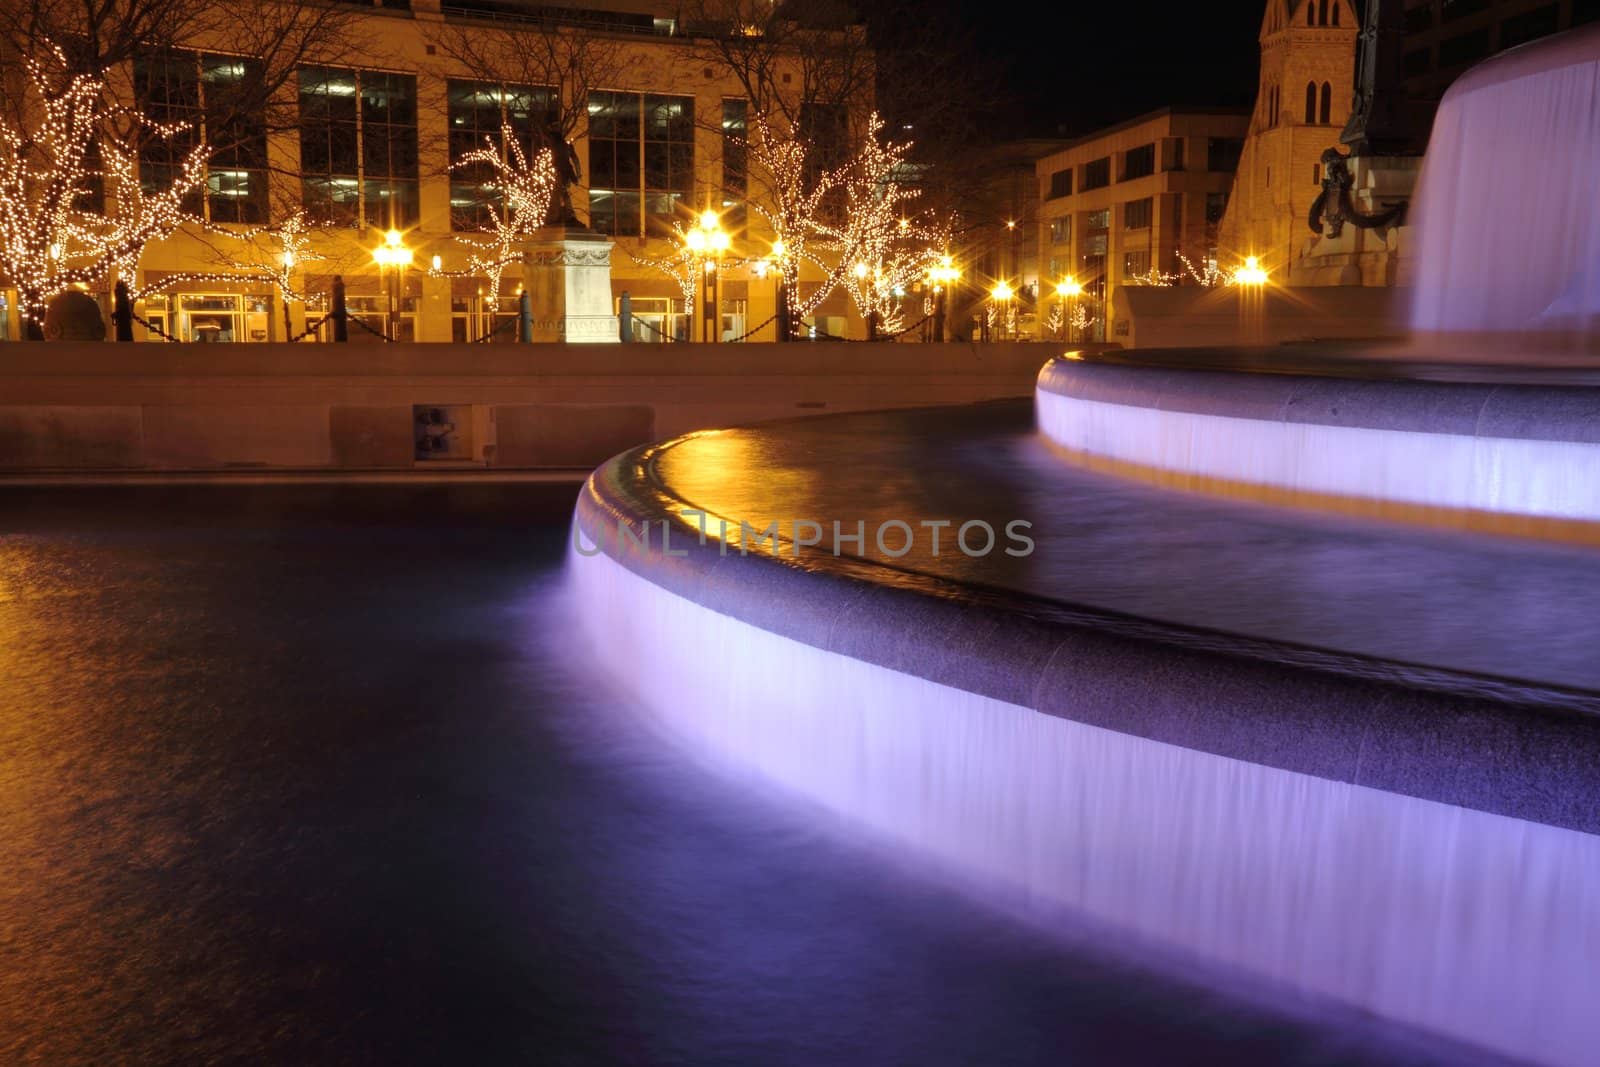 A city fountain eliminated at night with trees covered in lights.